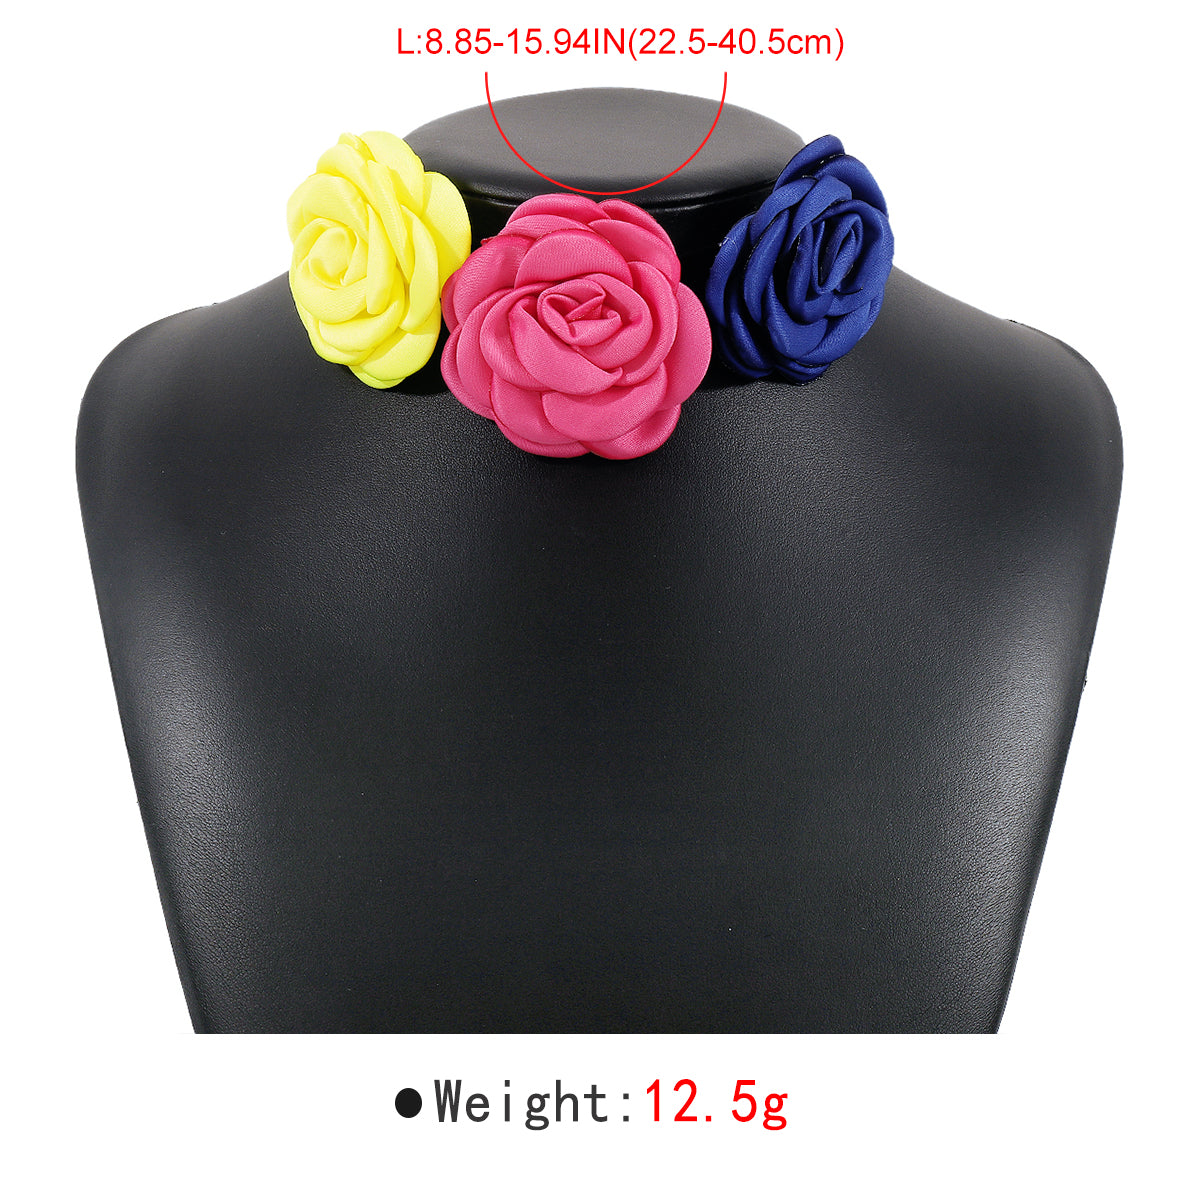 N11281 Mix and Match Roses Choker Necklace